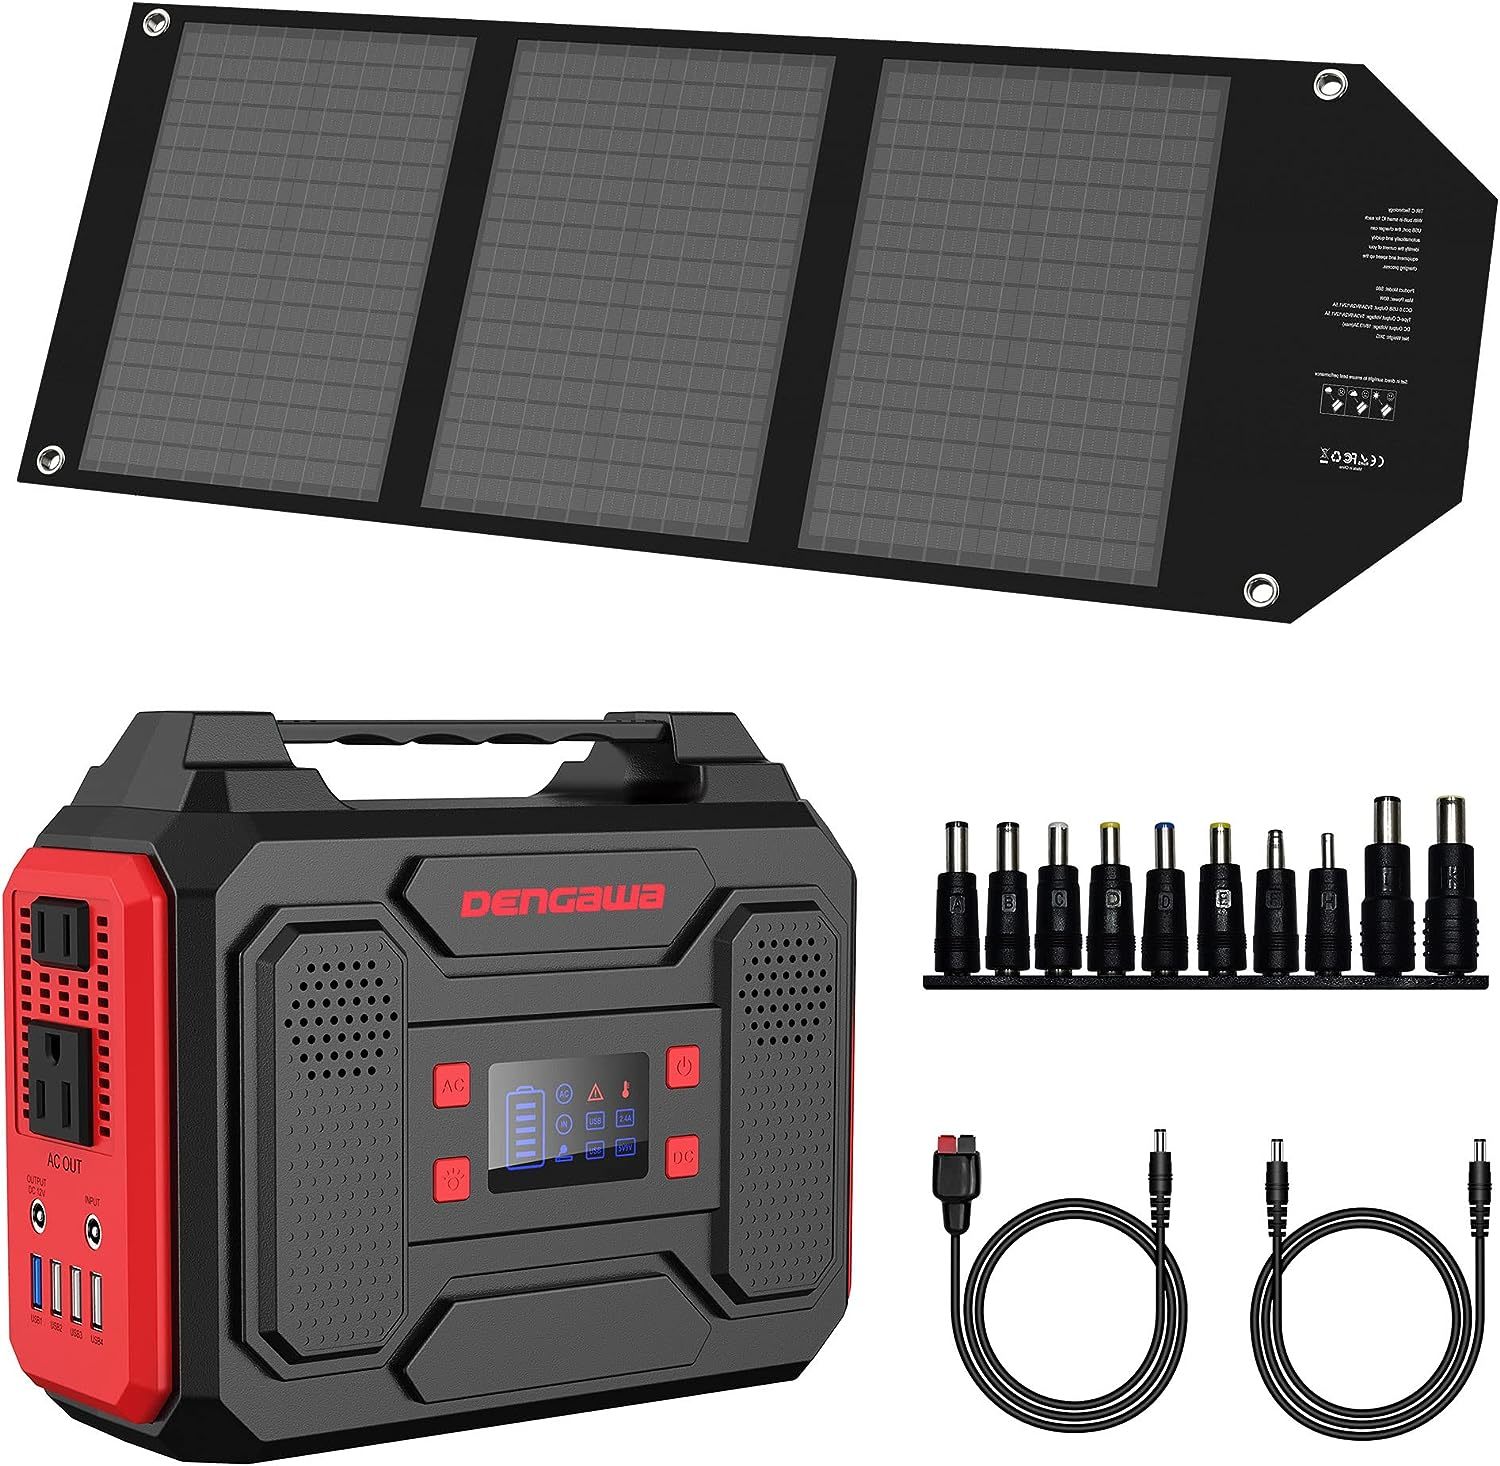 Duracell Power Station 300 with 100W Solar Panel for Power Outages, Emergency Kits, Home Electronics and Outdoor Use